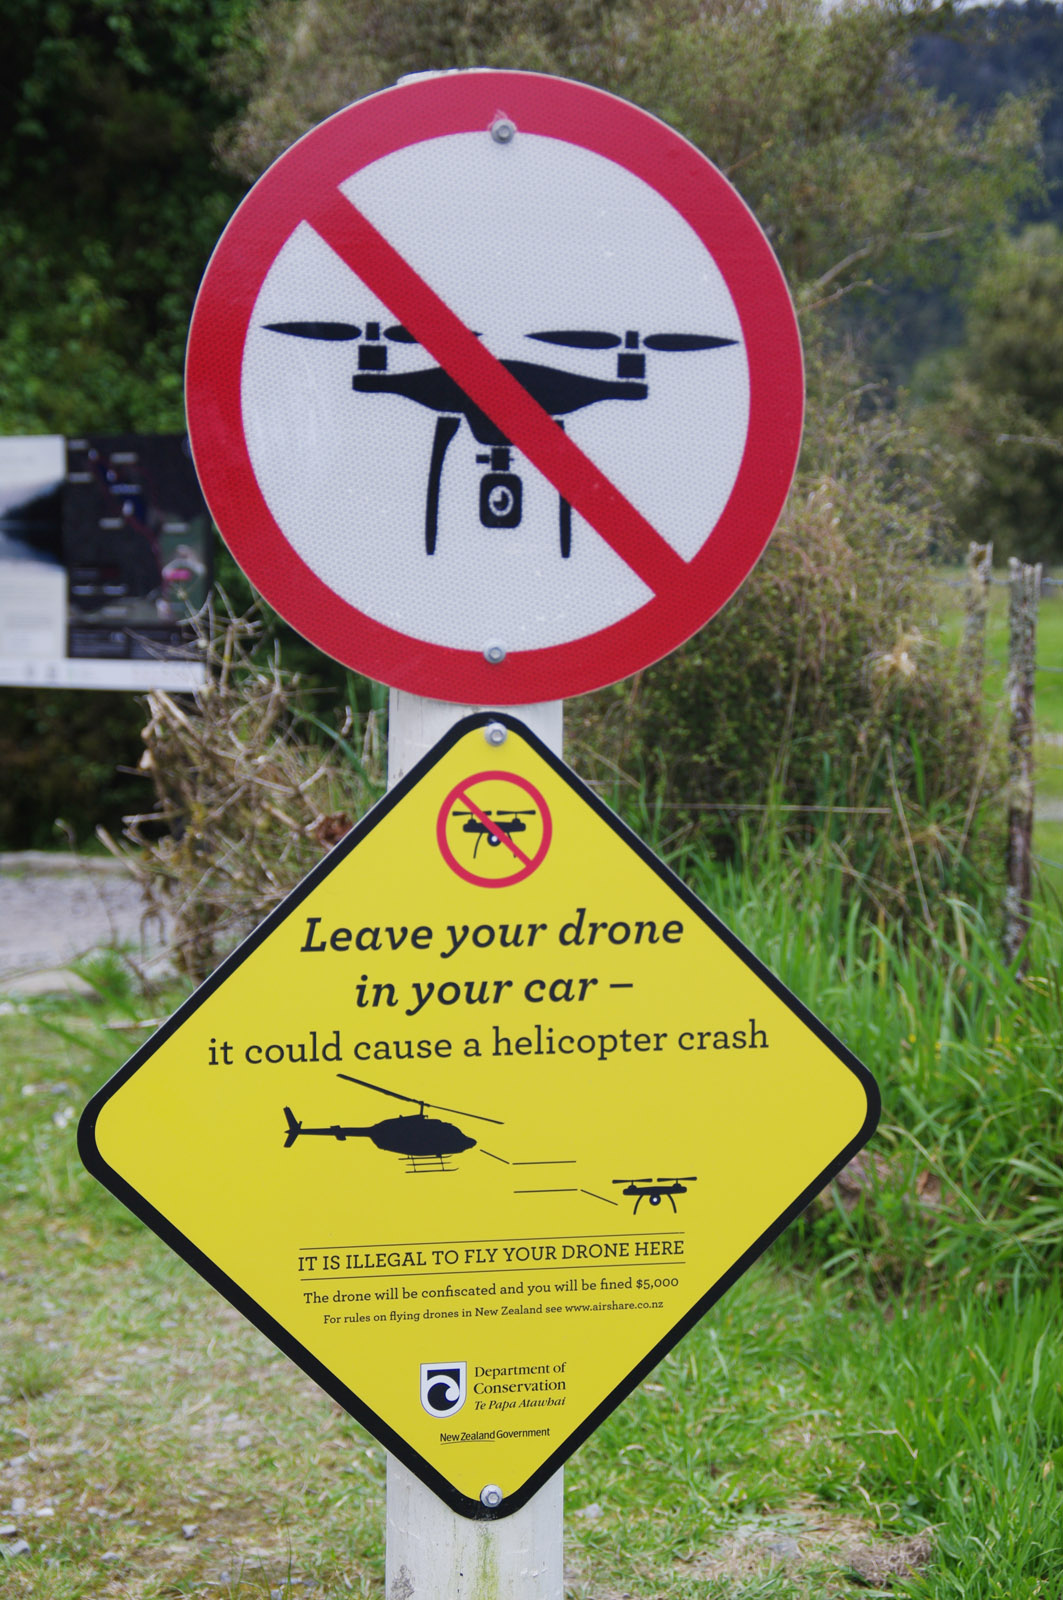 No drones allowed in the vicinity of helicopters.